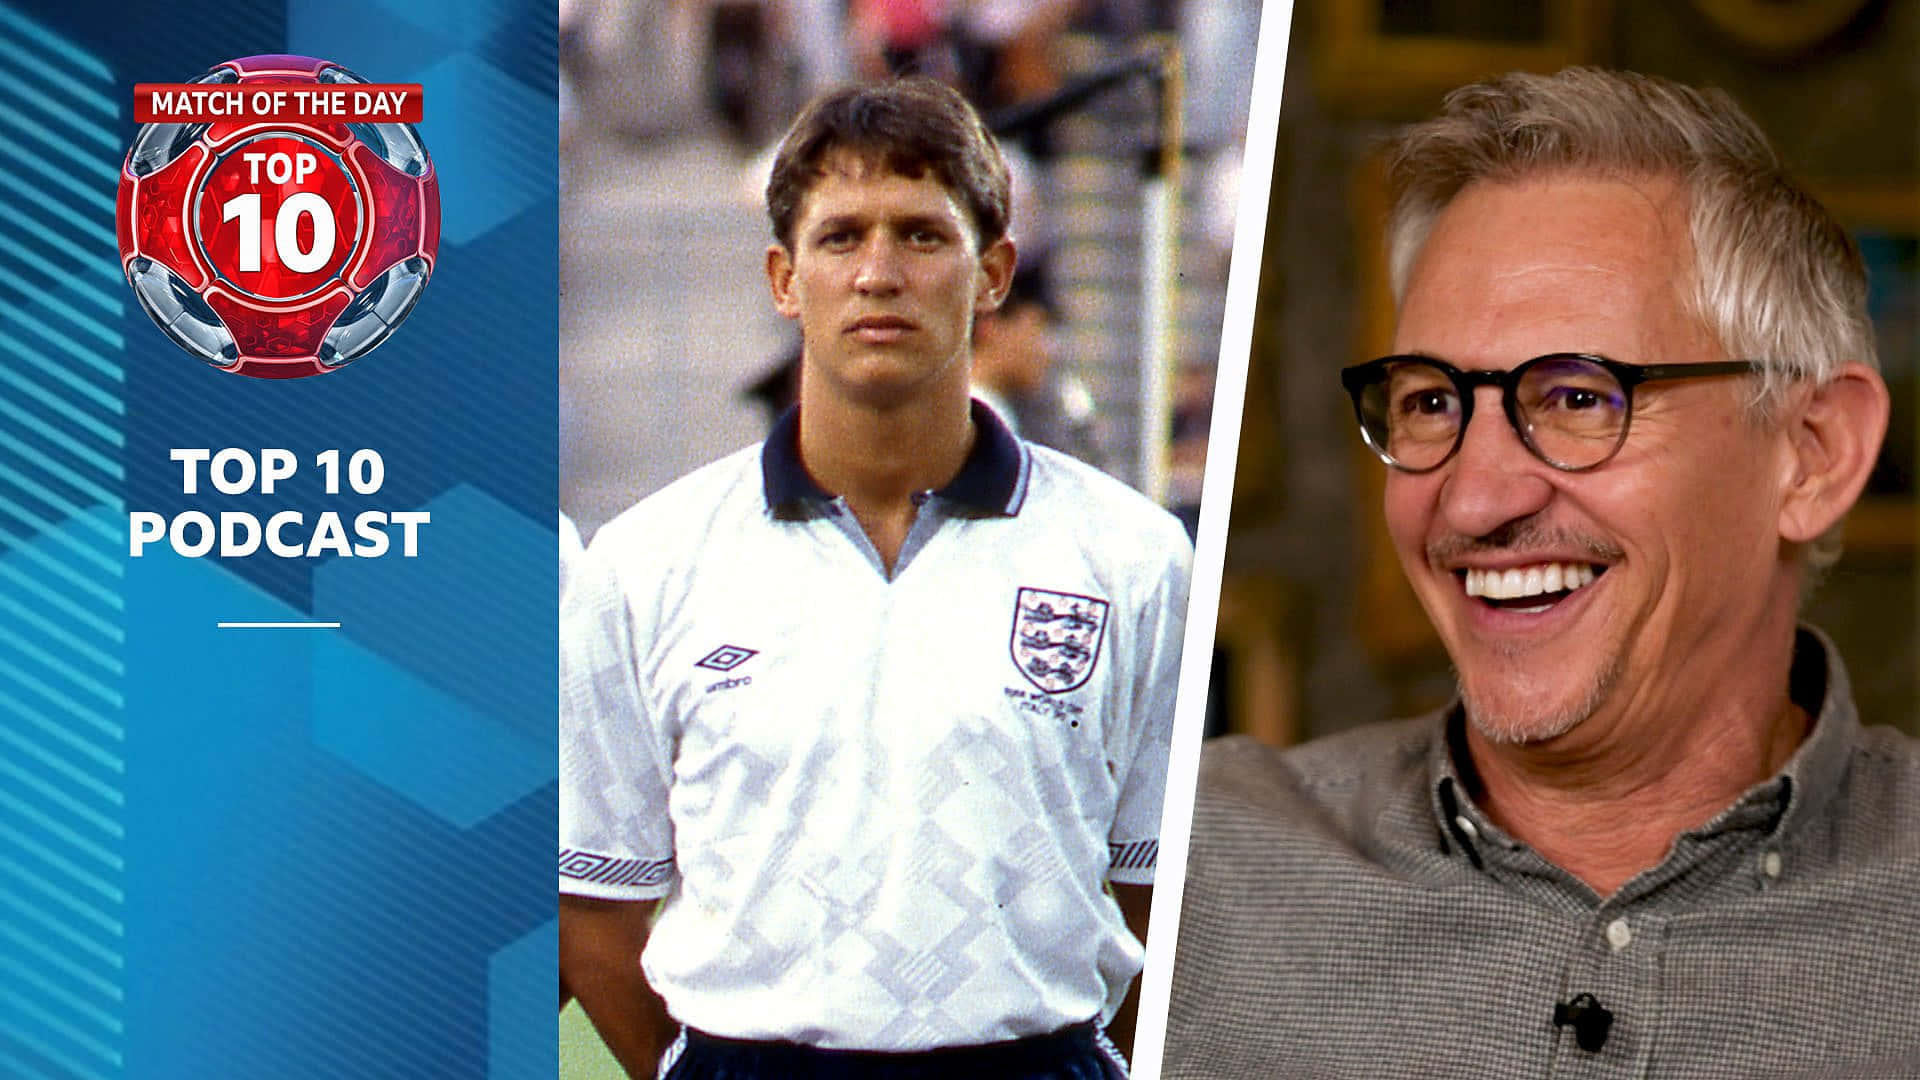 Gary Lineker Engaged in His Top 10 Podcast Wallpaper